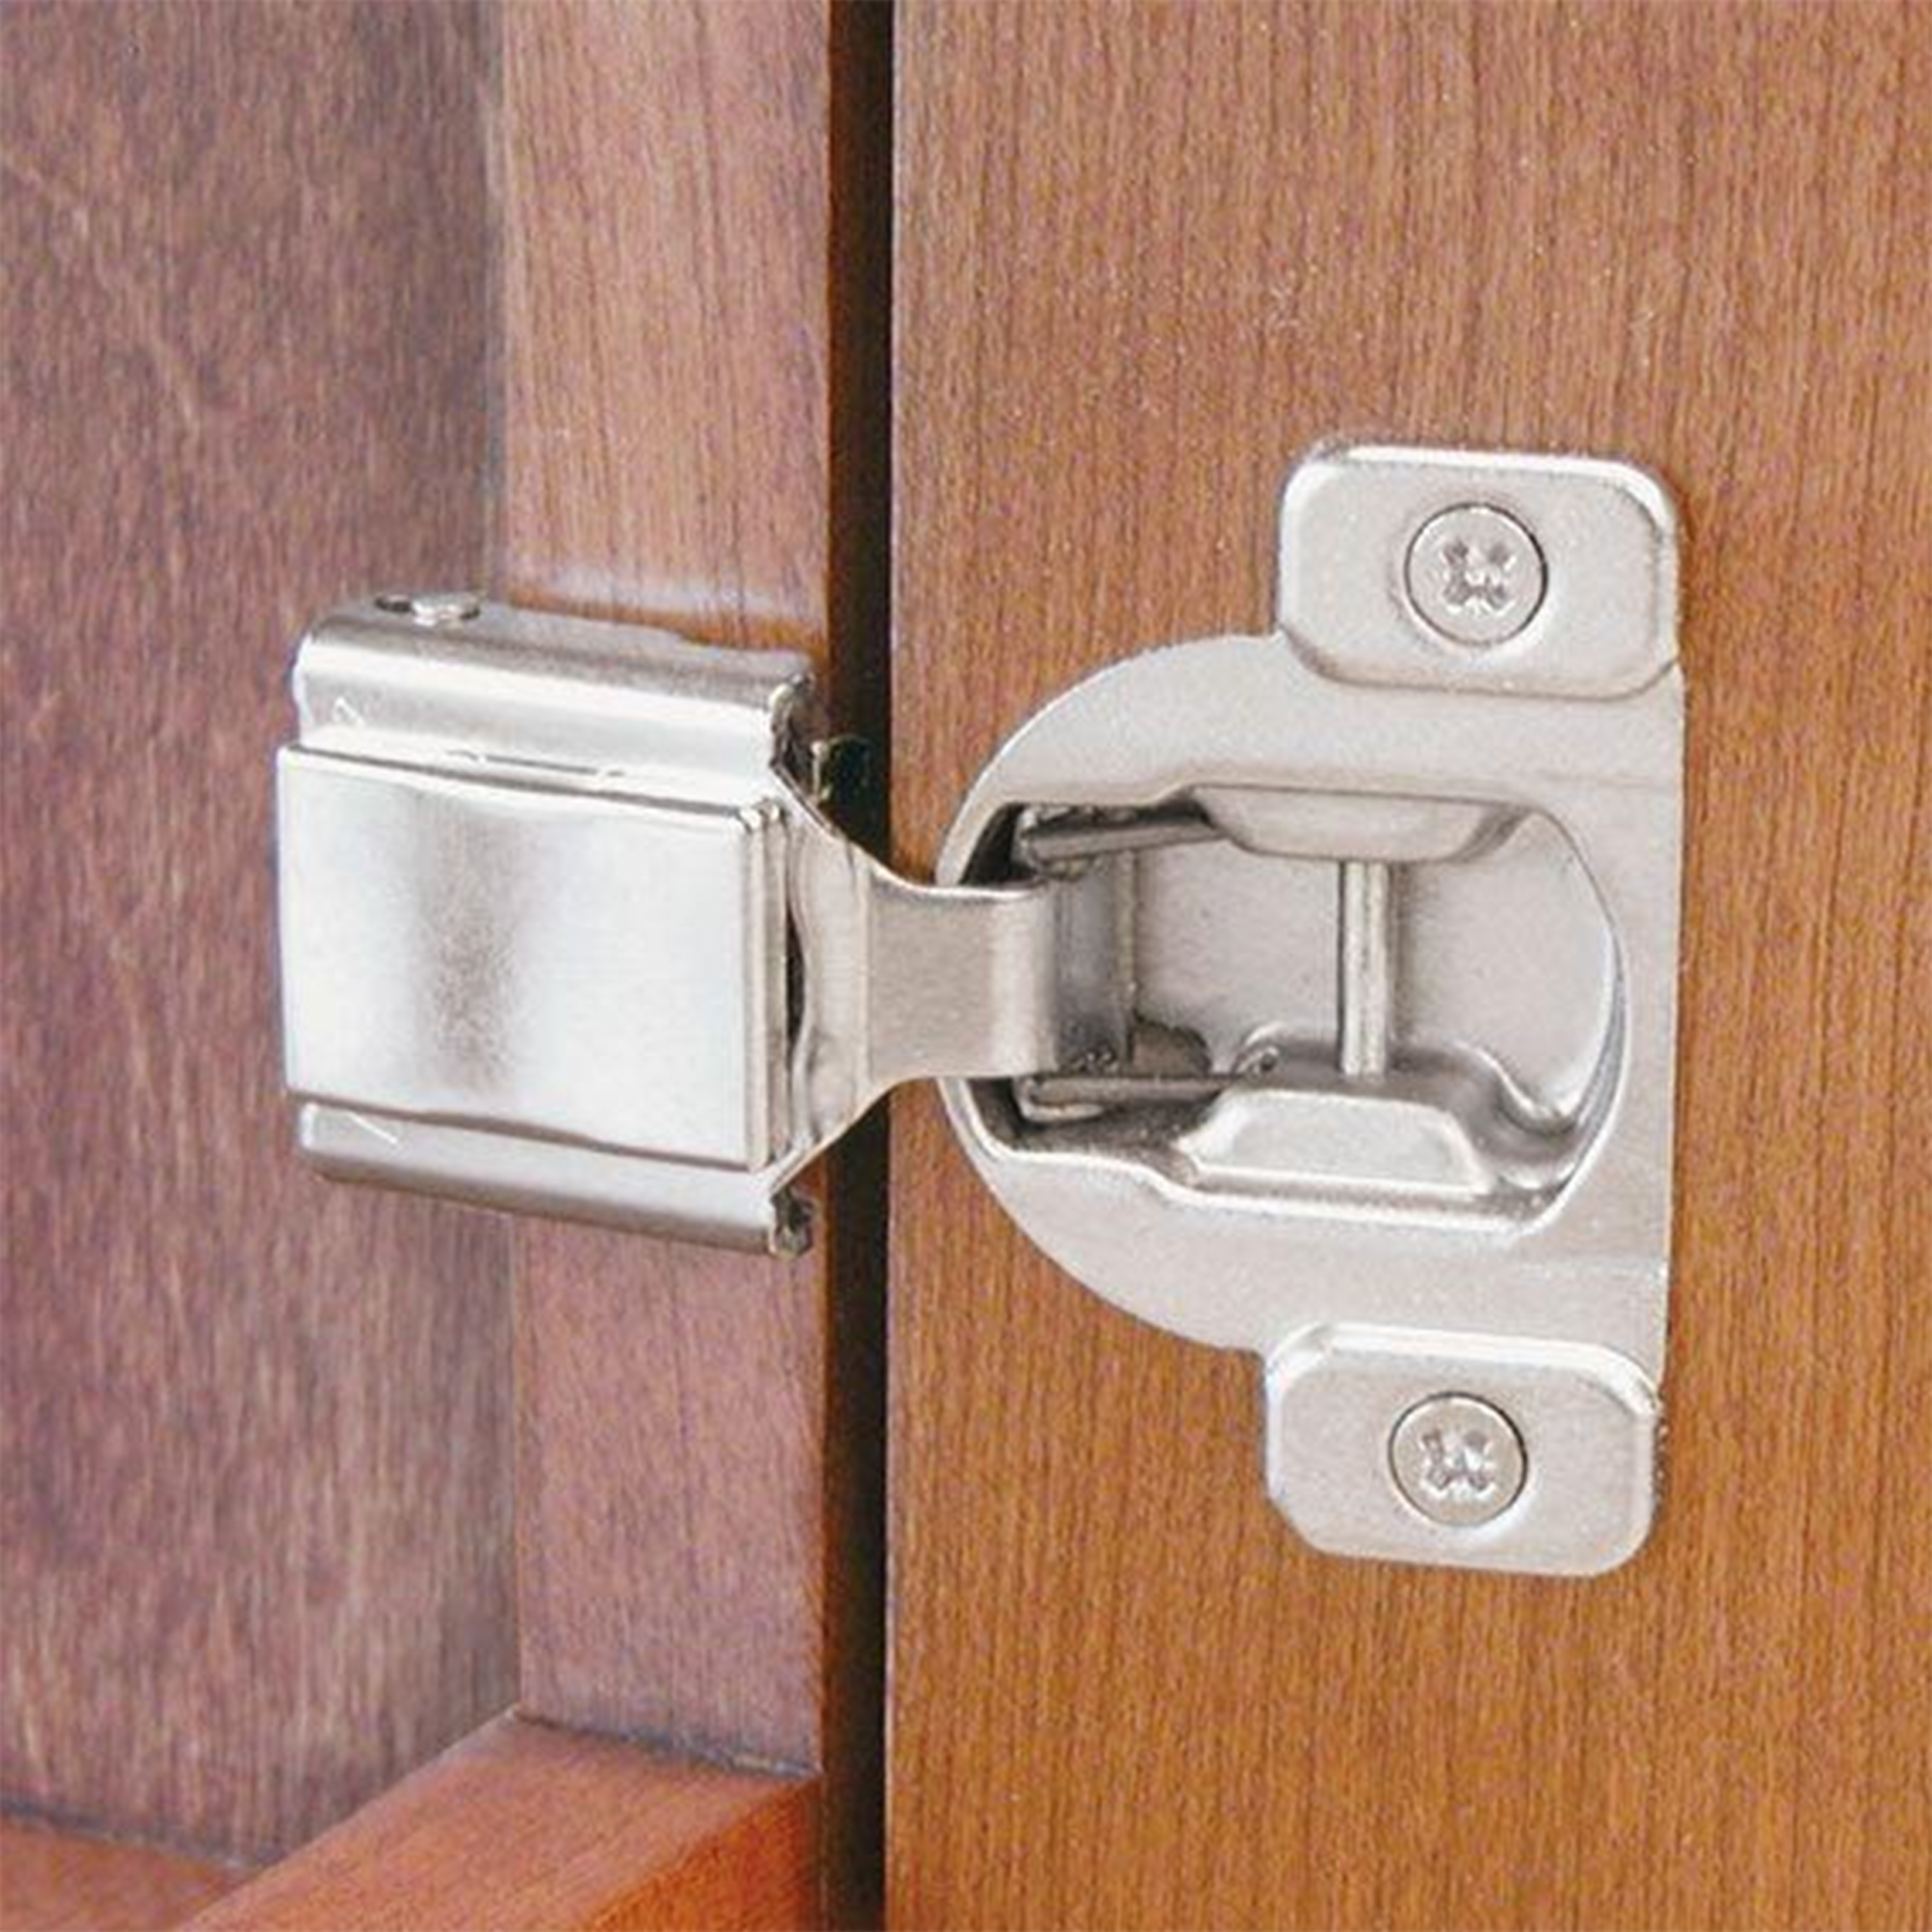 3/4" Face Frame Compact Cabinet Hinge, 2 Pack